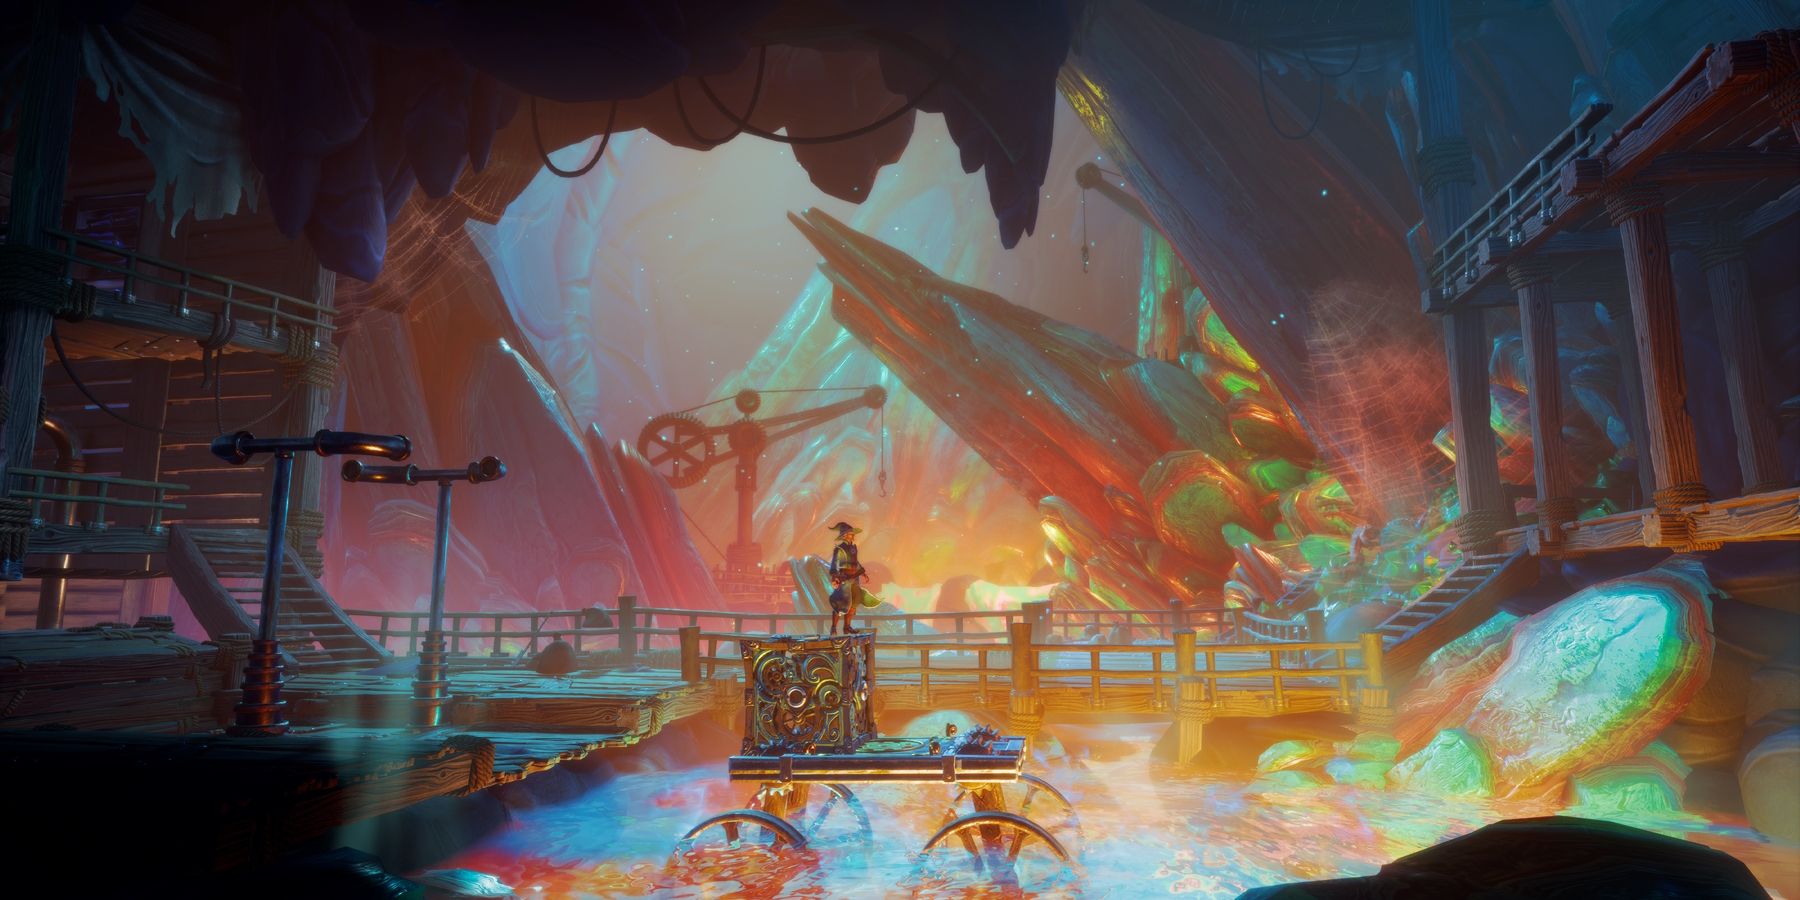 Trine 5: A Clockwork Conspiracy instal the last version for android